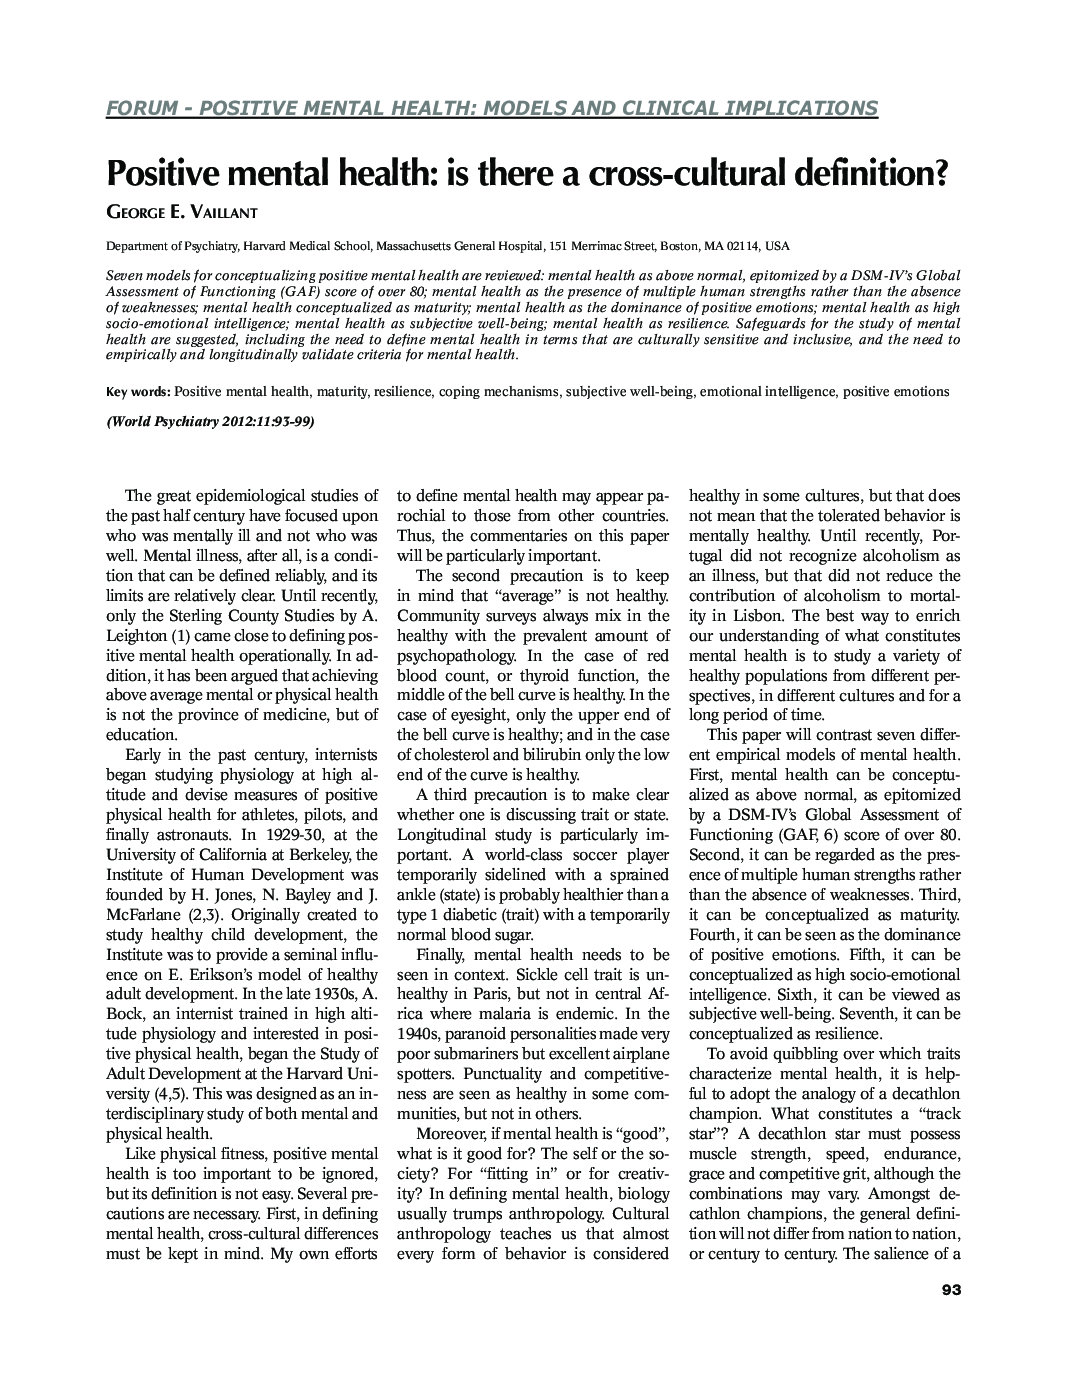 Positive mental health: is there a cross-cultural definition?